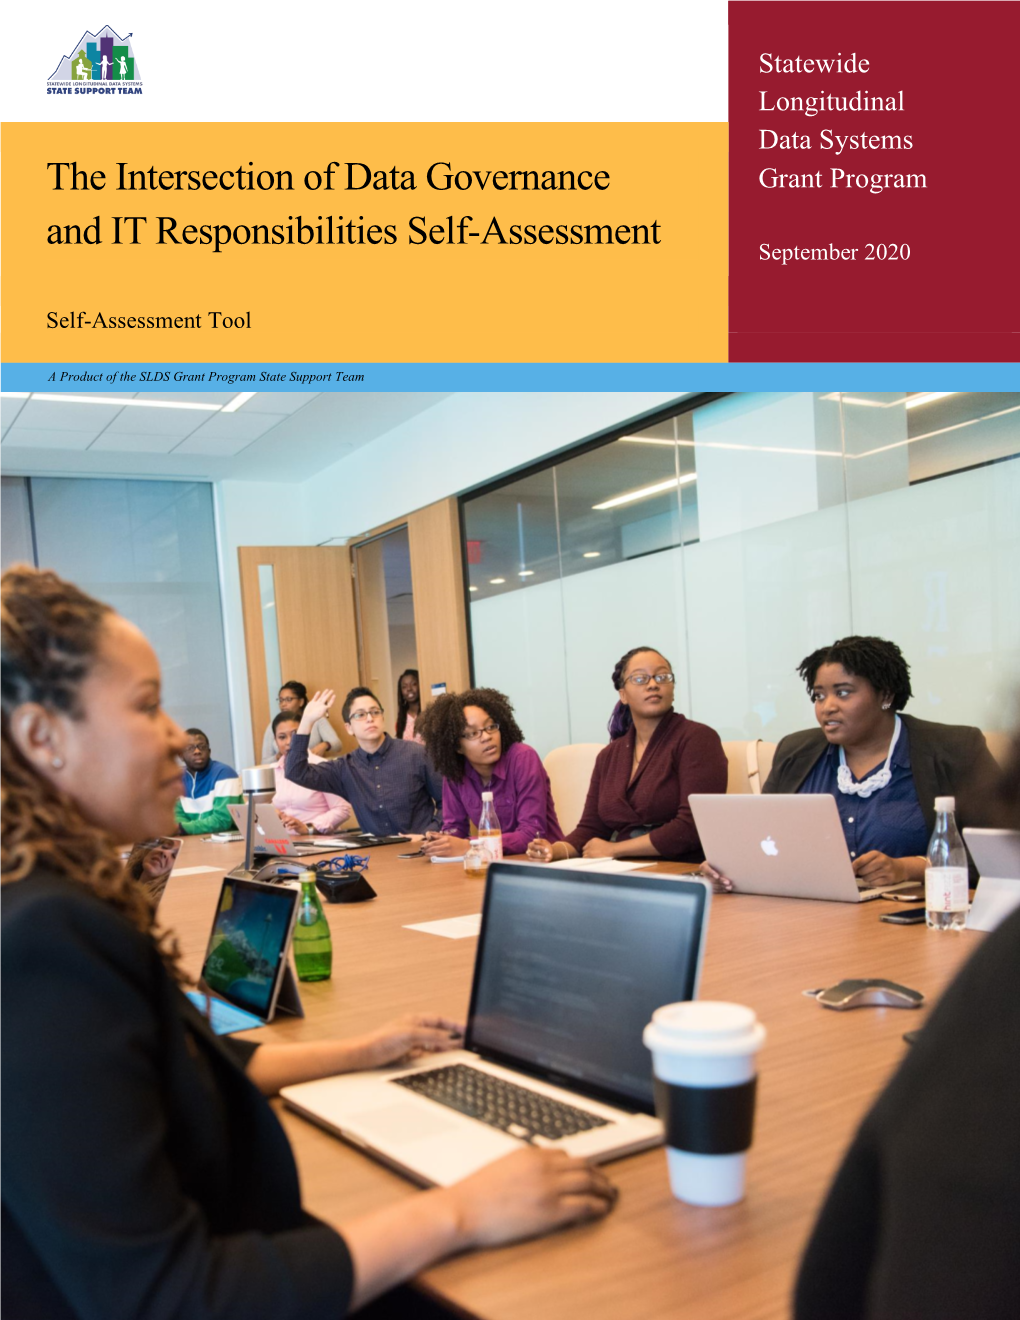 The Intersection of Data Governance and IT Collaboration Self-Assessment